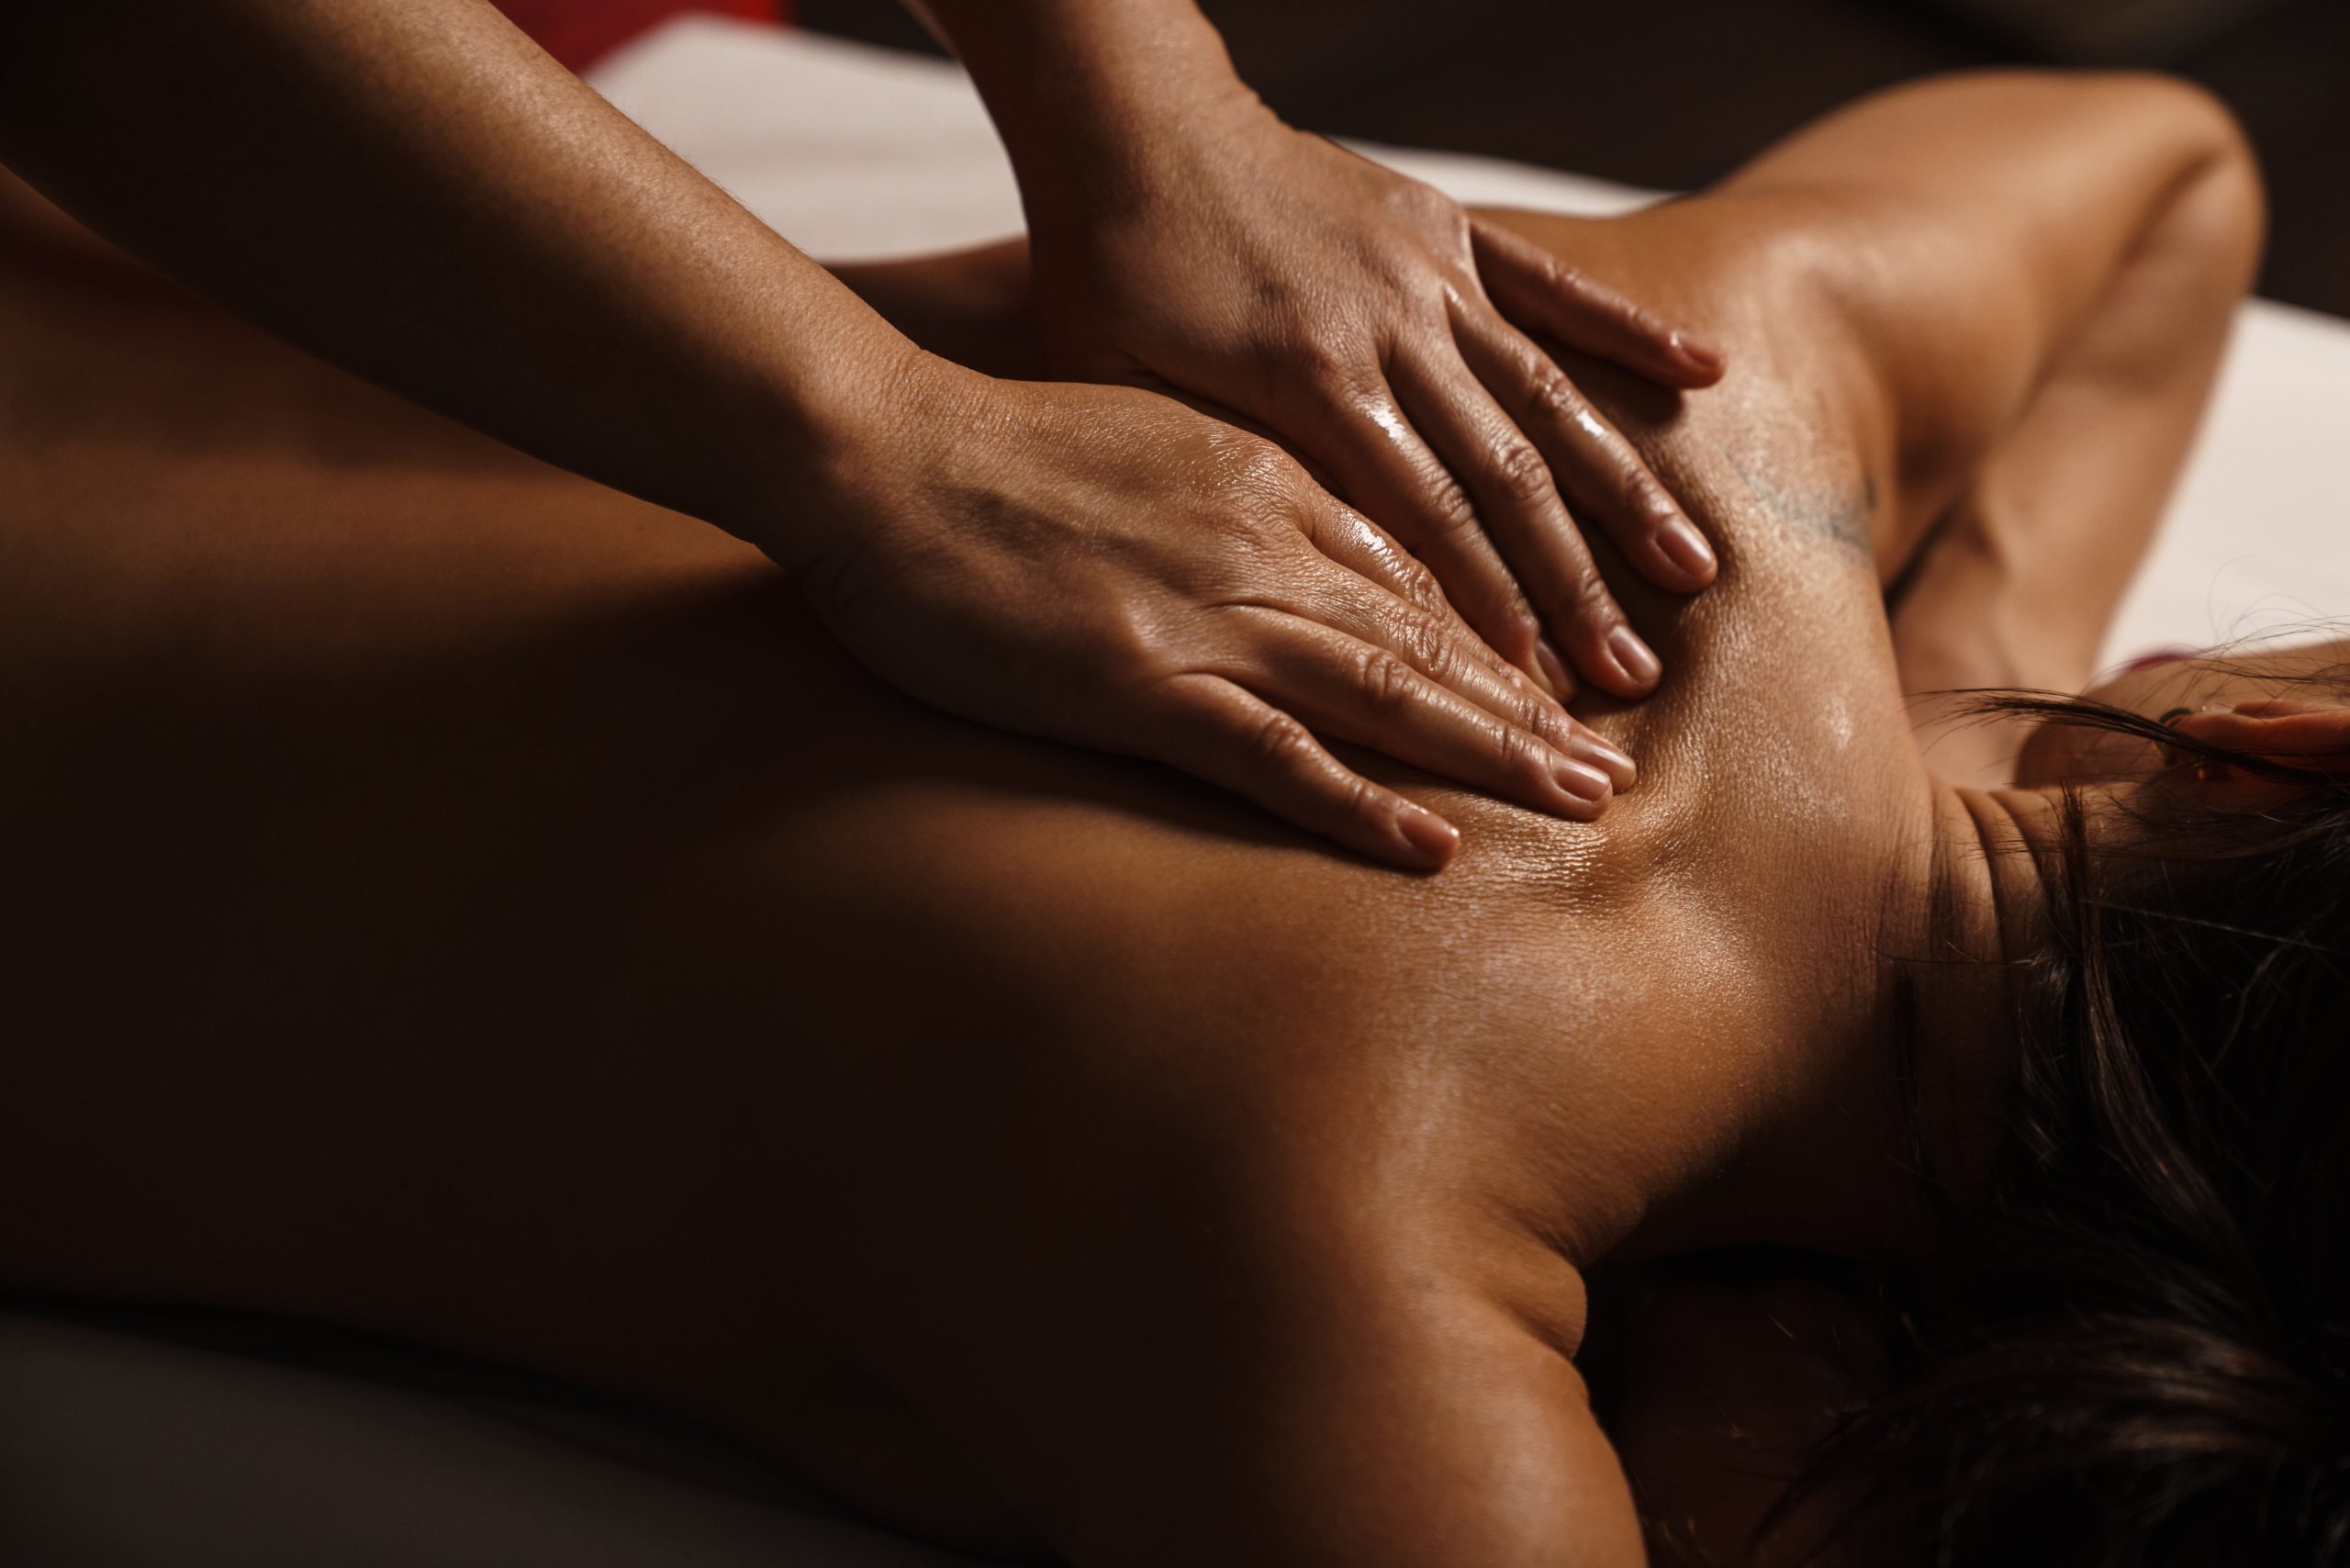 Is it necessary to make an appointment for massage therapy? faq - Massage Clinic